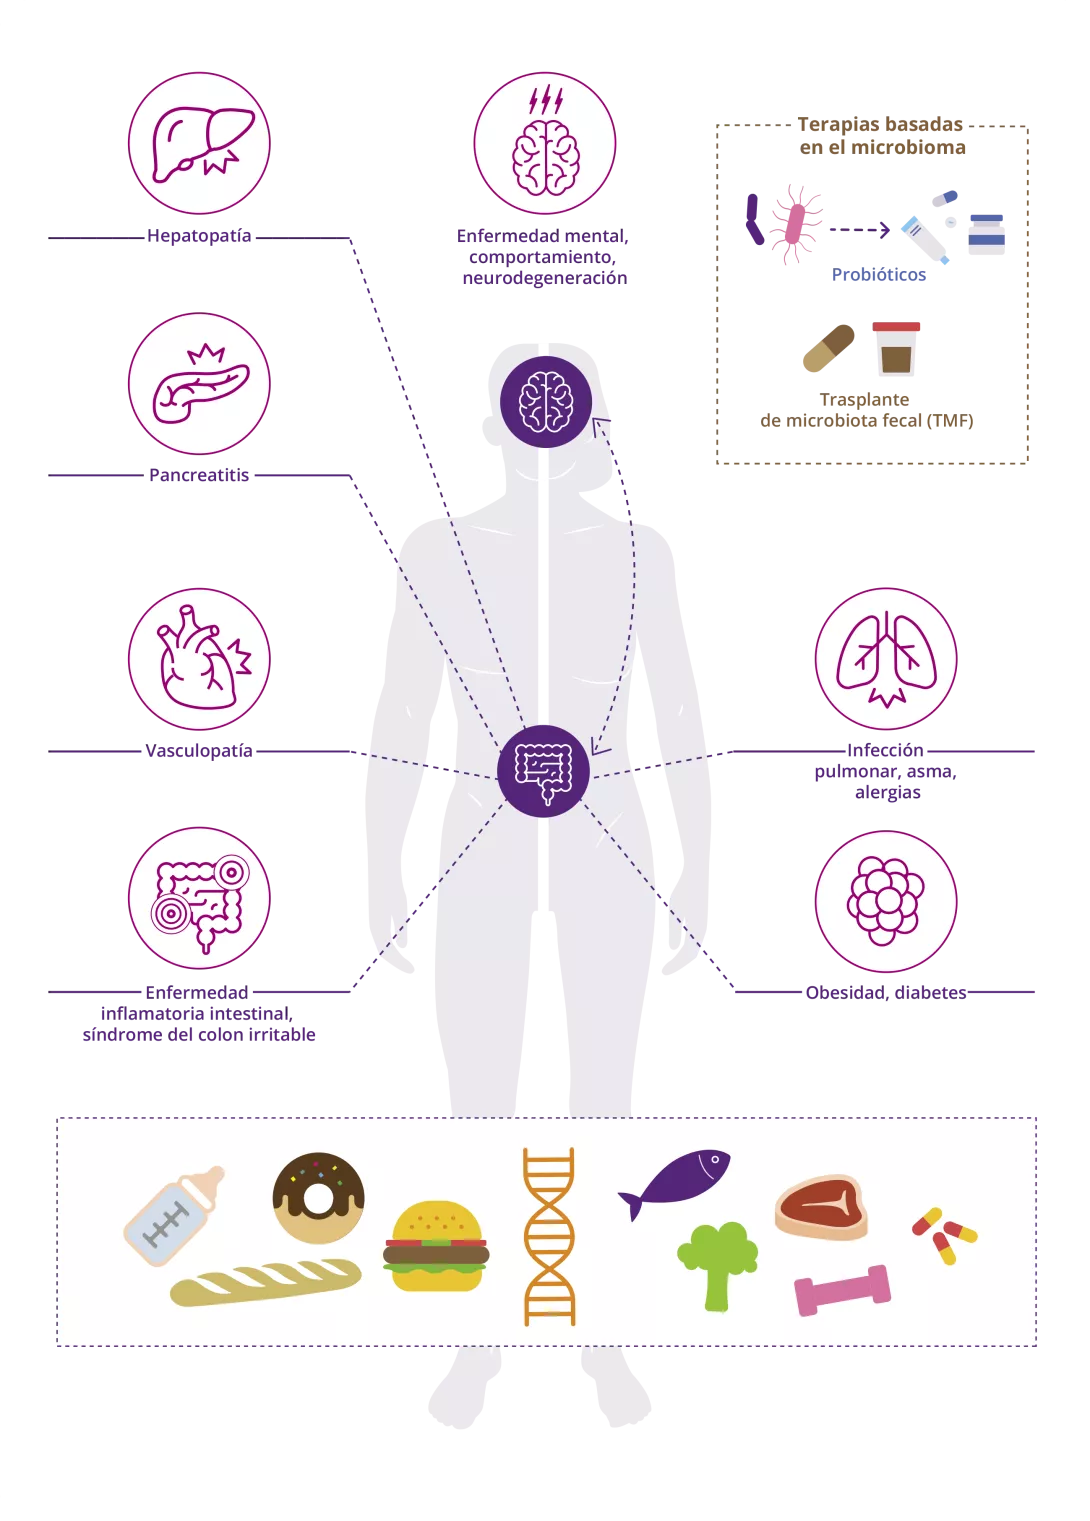 [infographic] The role of the gut microbiota in human health (ES)